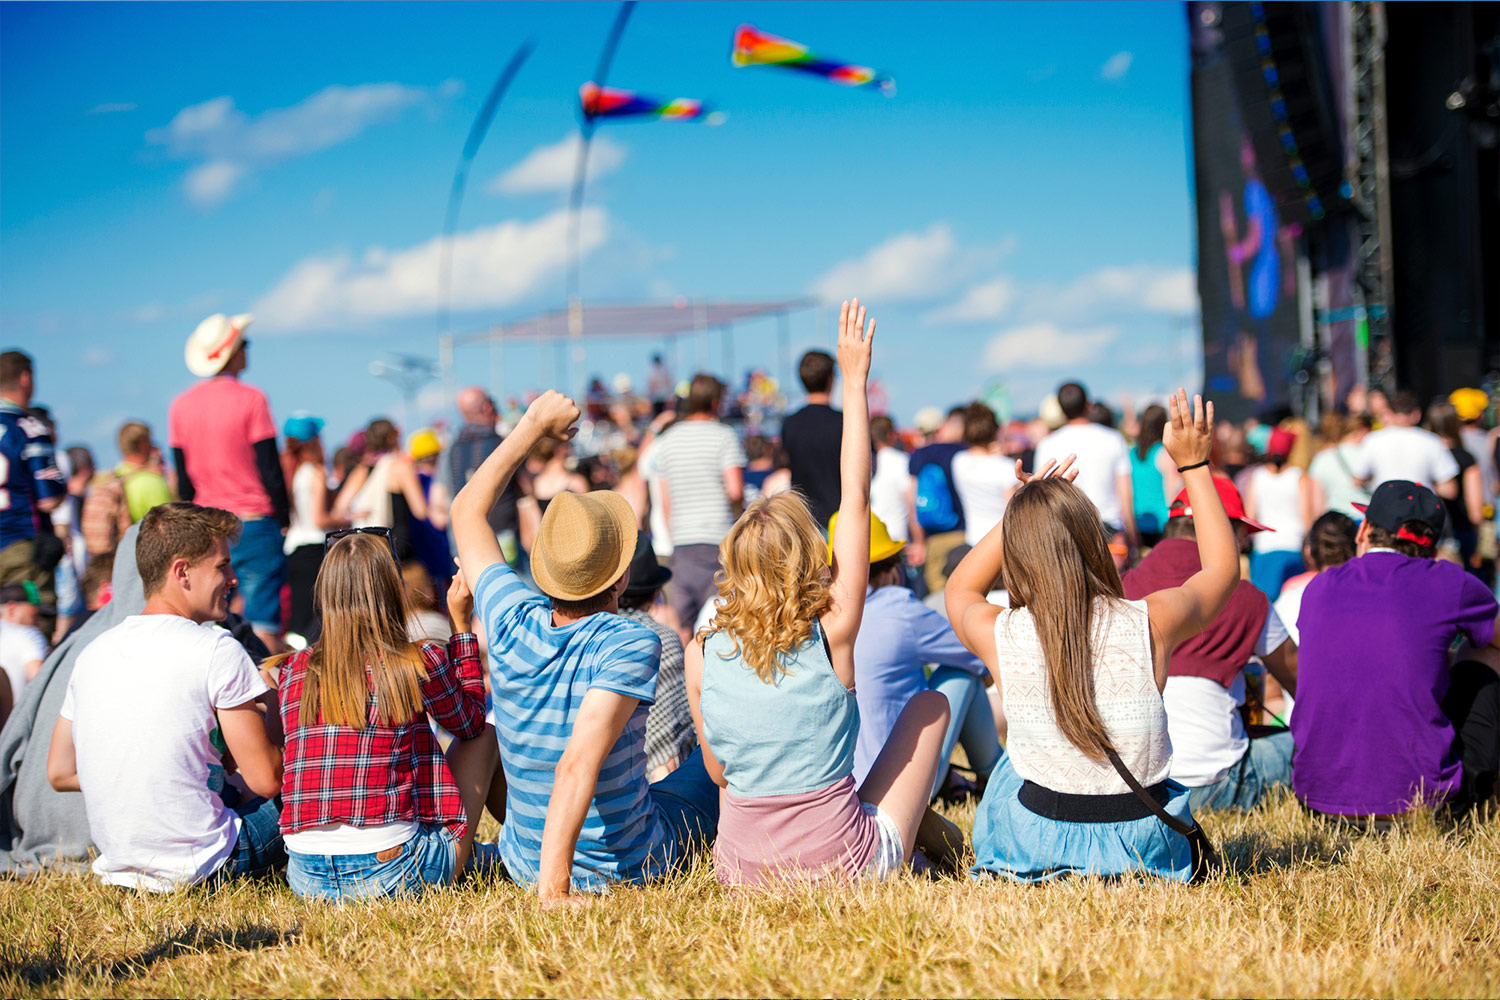 The music festivals are back